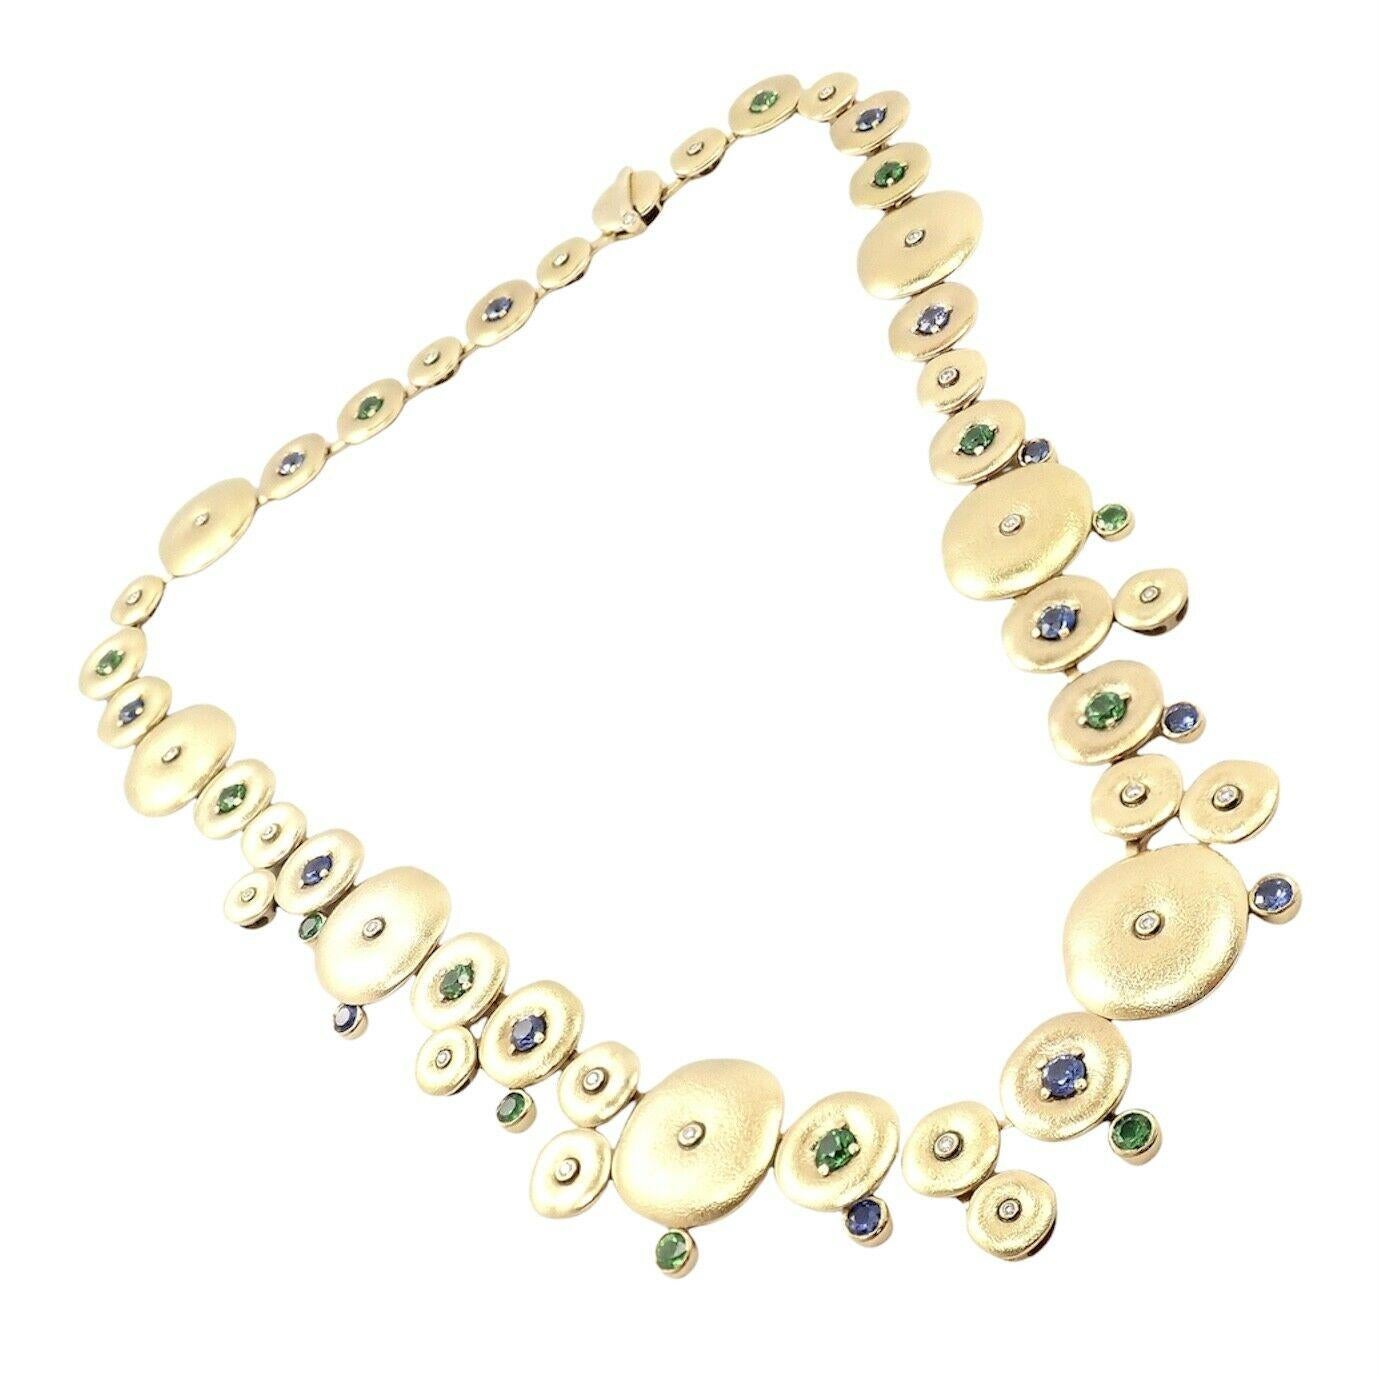 This beautiful 18k Yellow Gold necklace comes from designer Alex Sepkus. 
With 14x Tsavorites (2.20ct)
14x Sapphires (2.20ct)
24x Diamonds (0.30ct)
NUMBERED #29
Measurements: 
Widest Disc: 15mm
Total Length: 17